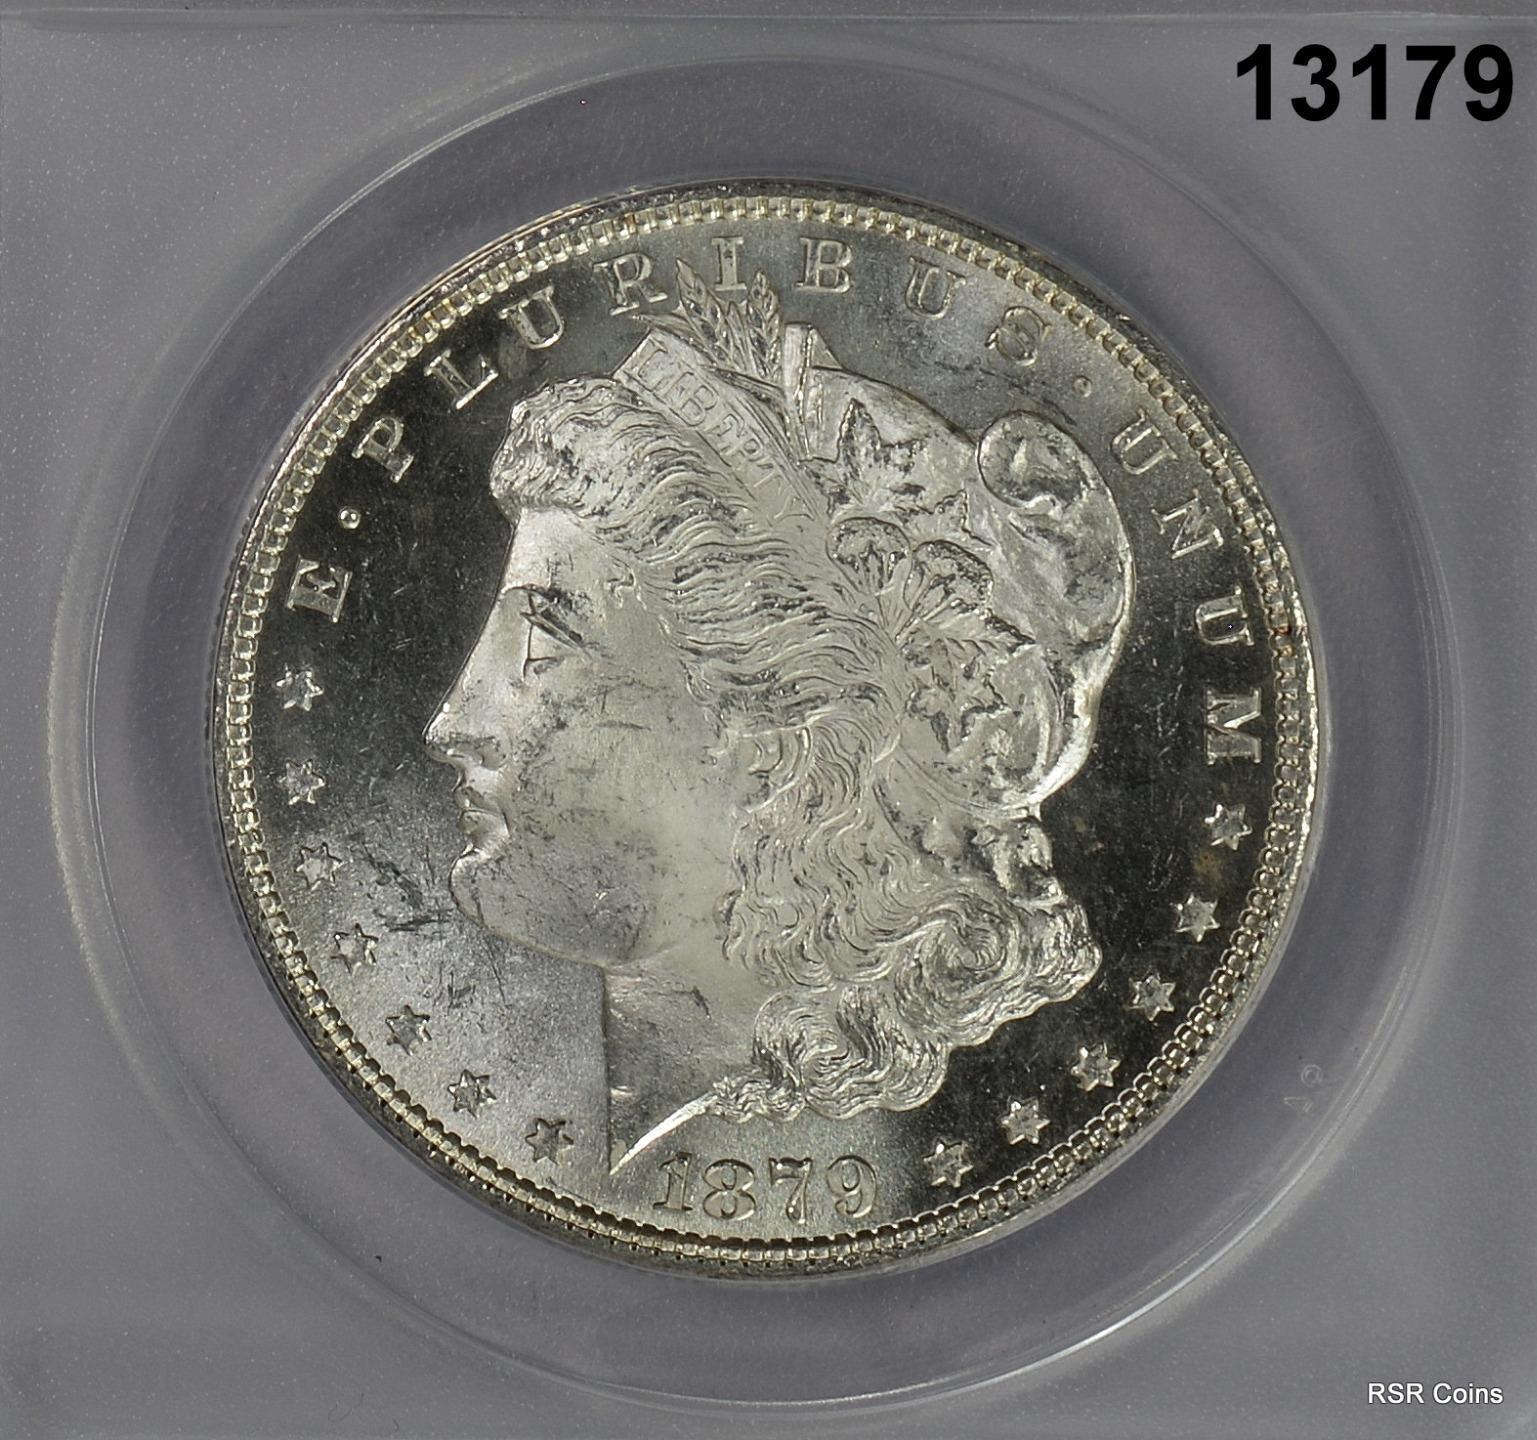 1879 S MORGAN SILVER DOLLAR ANACS CERTIFIED MS63 LOOKS MUCH BETTER! (PL) #13179